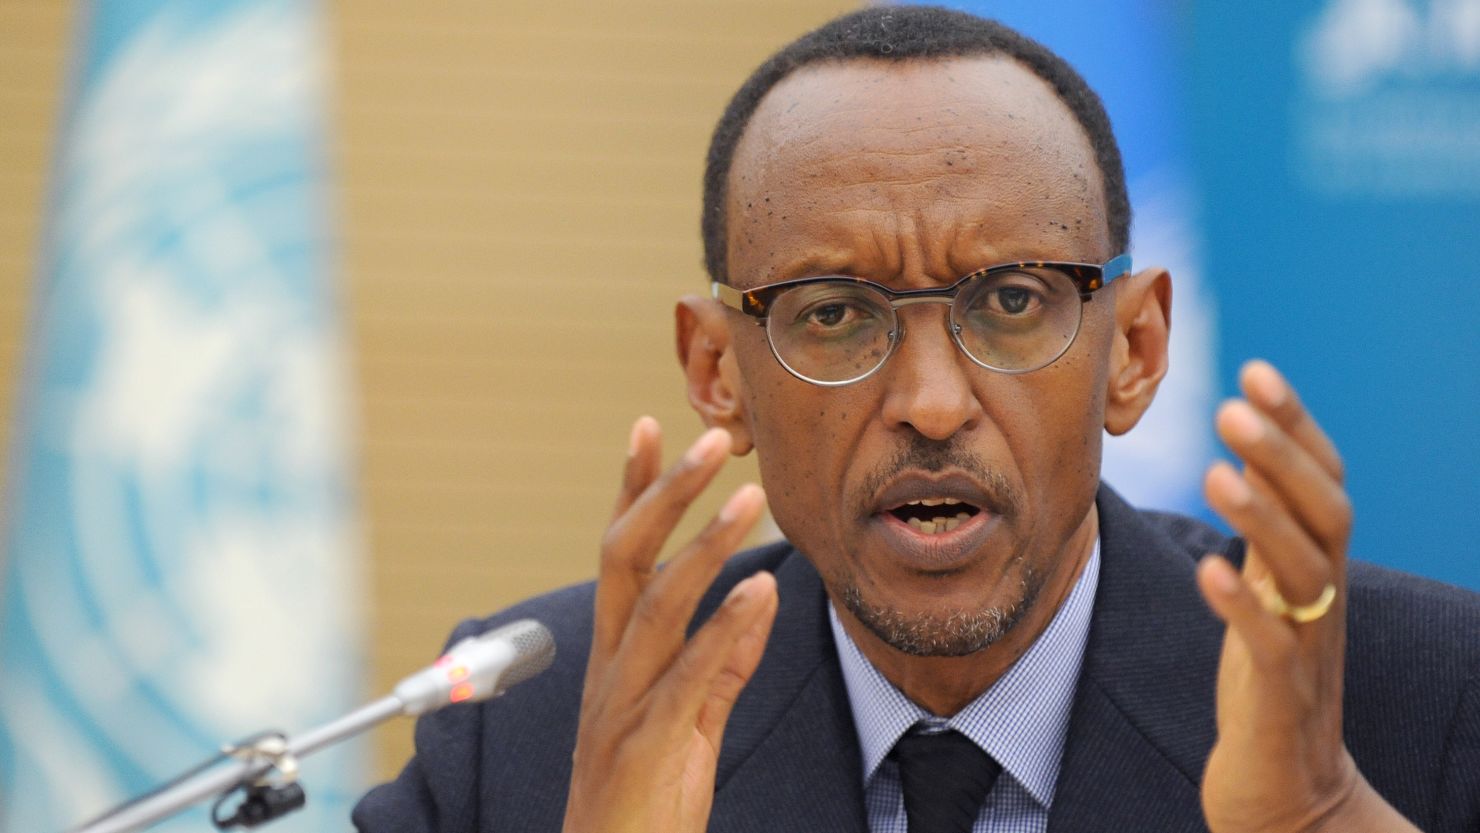 File photo of Rwanda President Paul Kagame, who said what the courts achieved went beyond expectations.